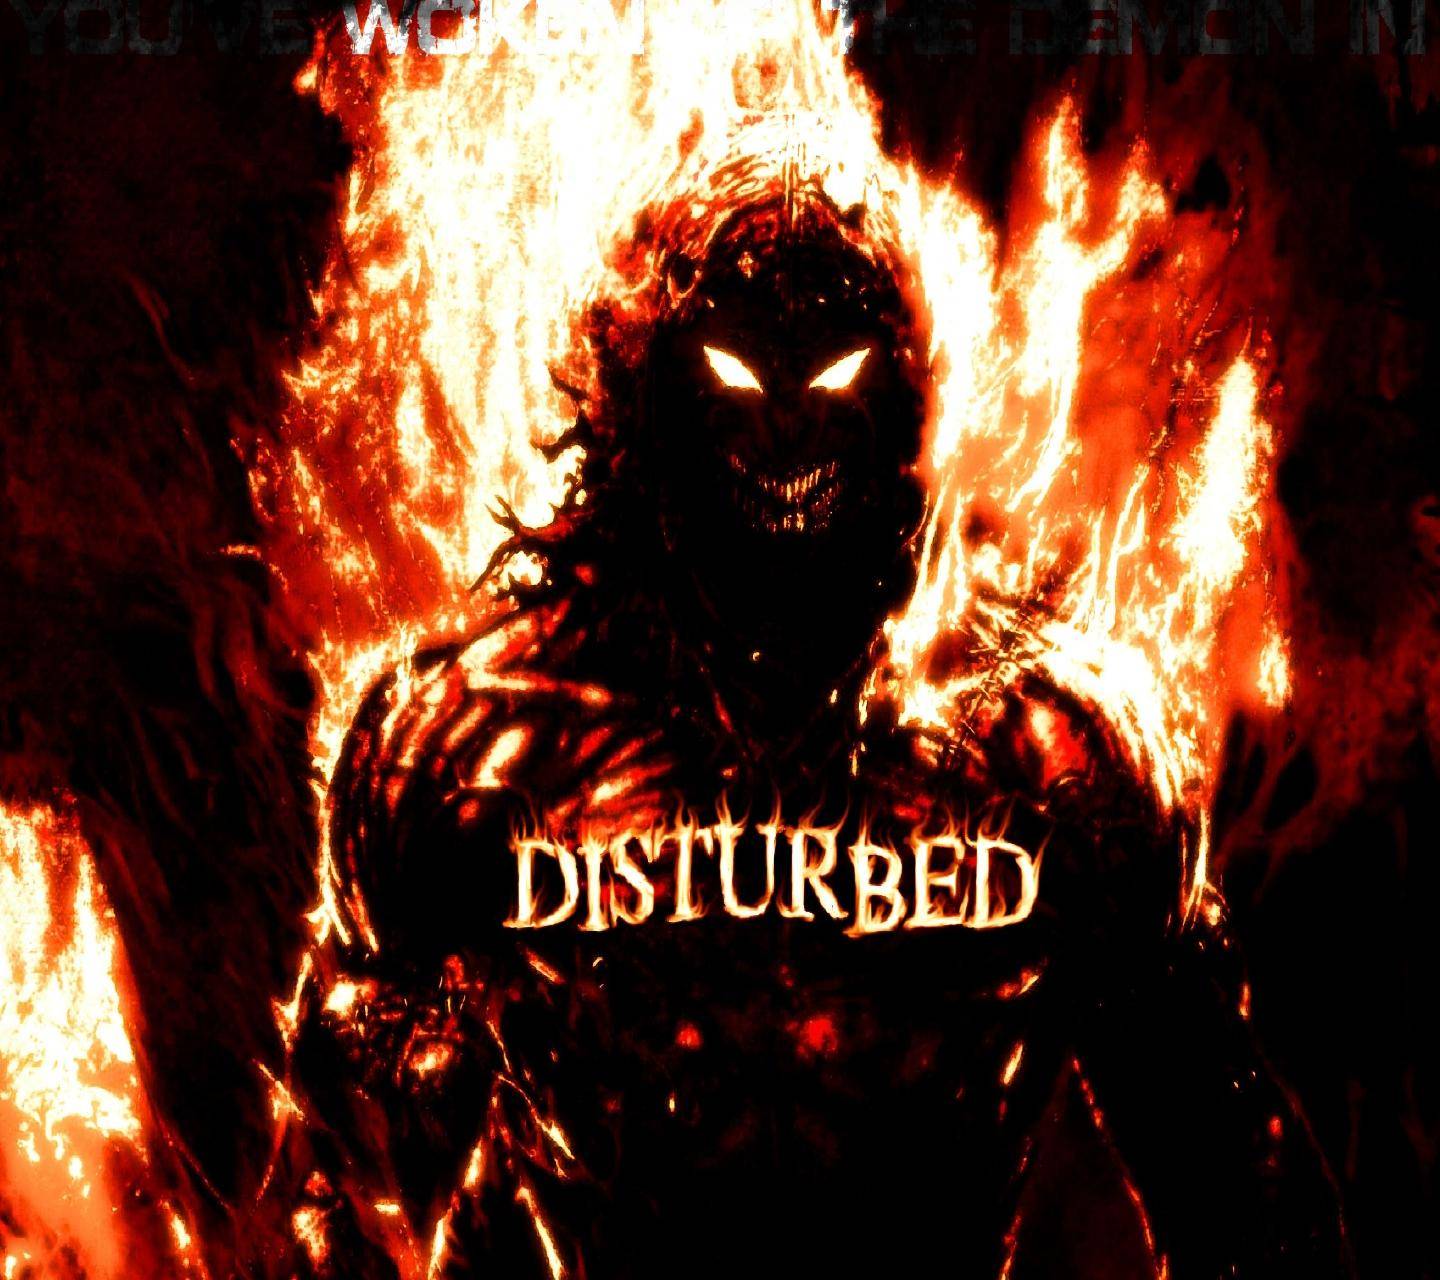 Download free disturbed wallpaper for your mobile phone